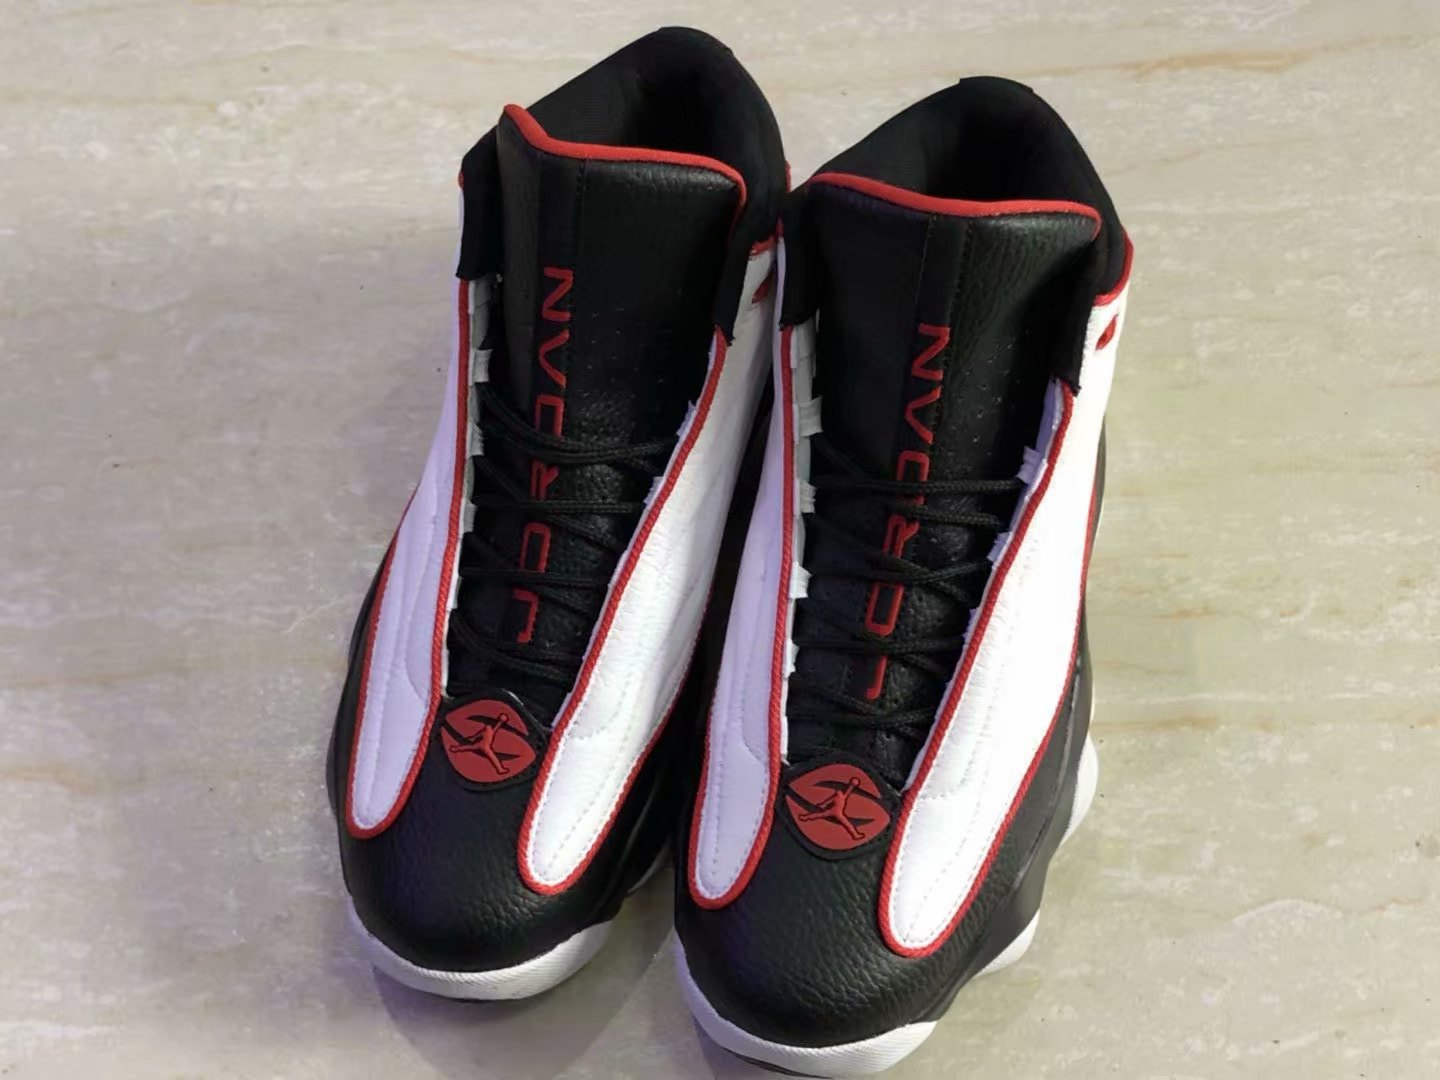 New Air Jordan 13.5 Black White Red Shoes - Click Image to Close